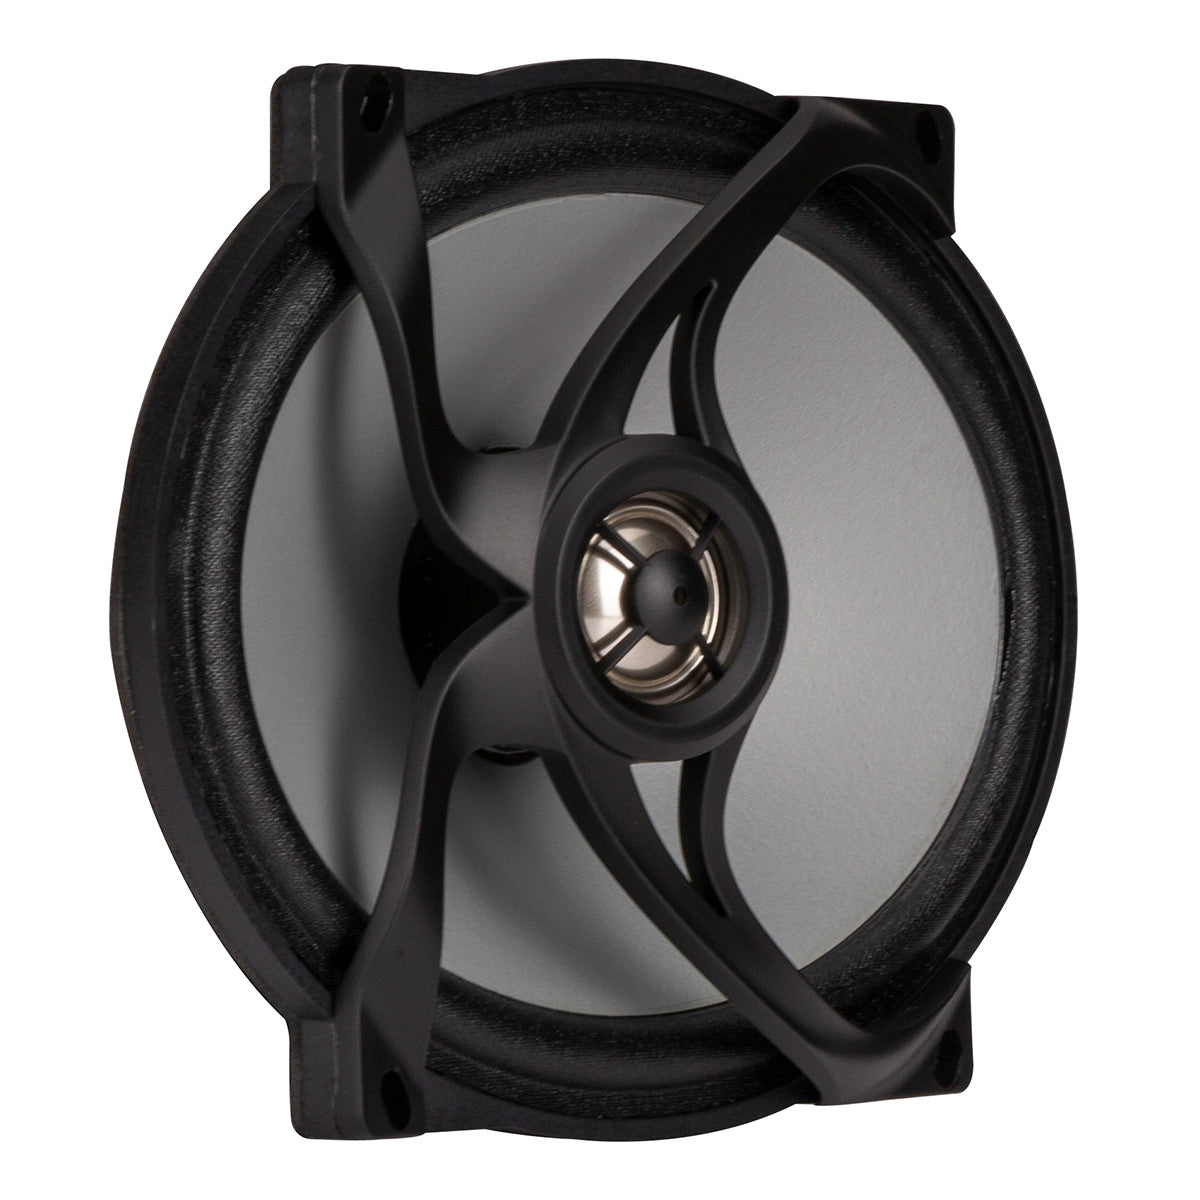 Kicker PS 5 x 7" Replacement 2-Way Coaxial 2 ohm Weather-Proof Speakers for 2006 and Newer Harley Davidson - Pair